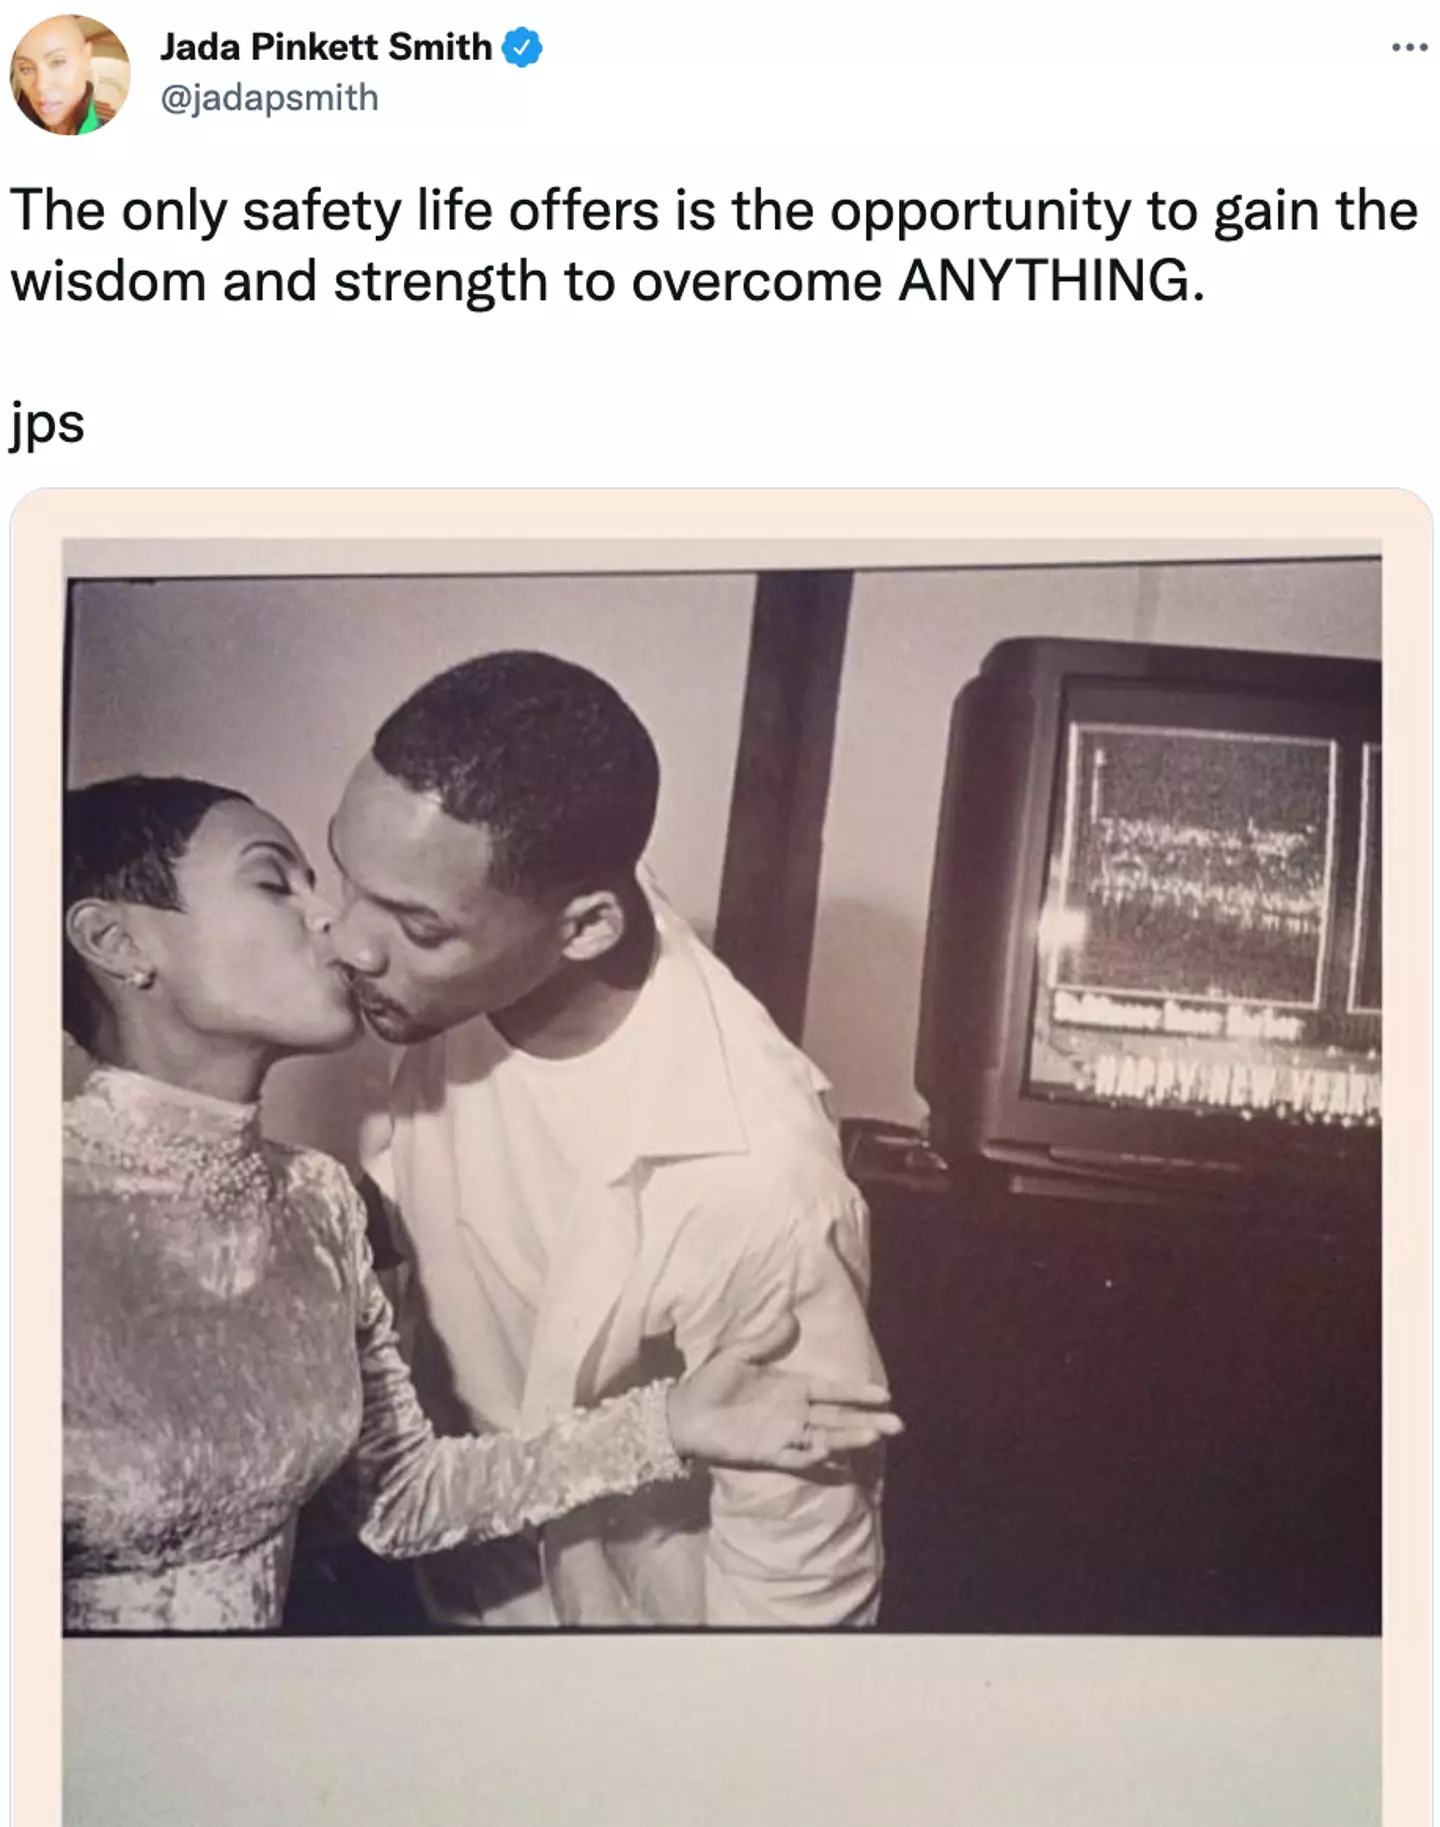 Jada shared a rare picture from their wedding on Twitter. (